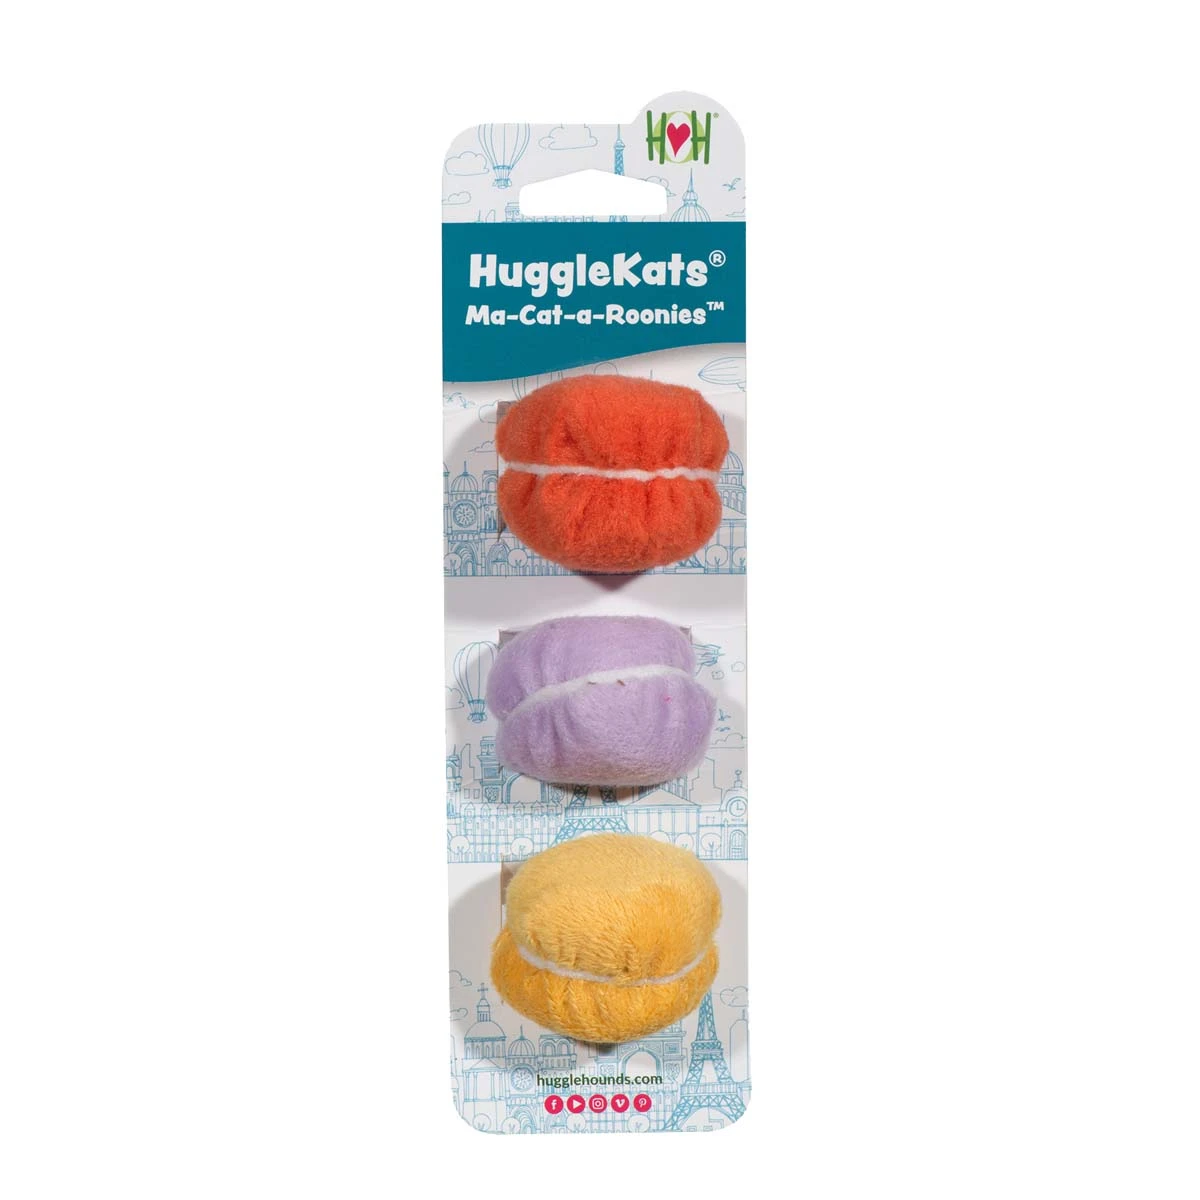 HuggleKat Ma-Cat-a-Roonies Cat Toy with Catnip - 3 pack 